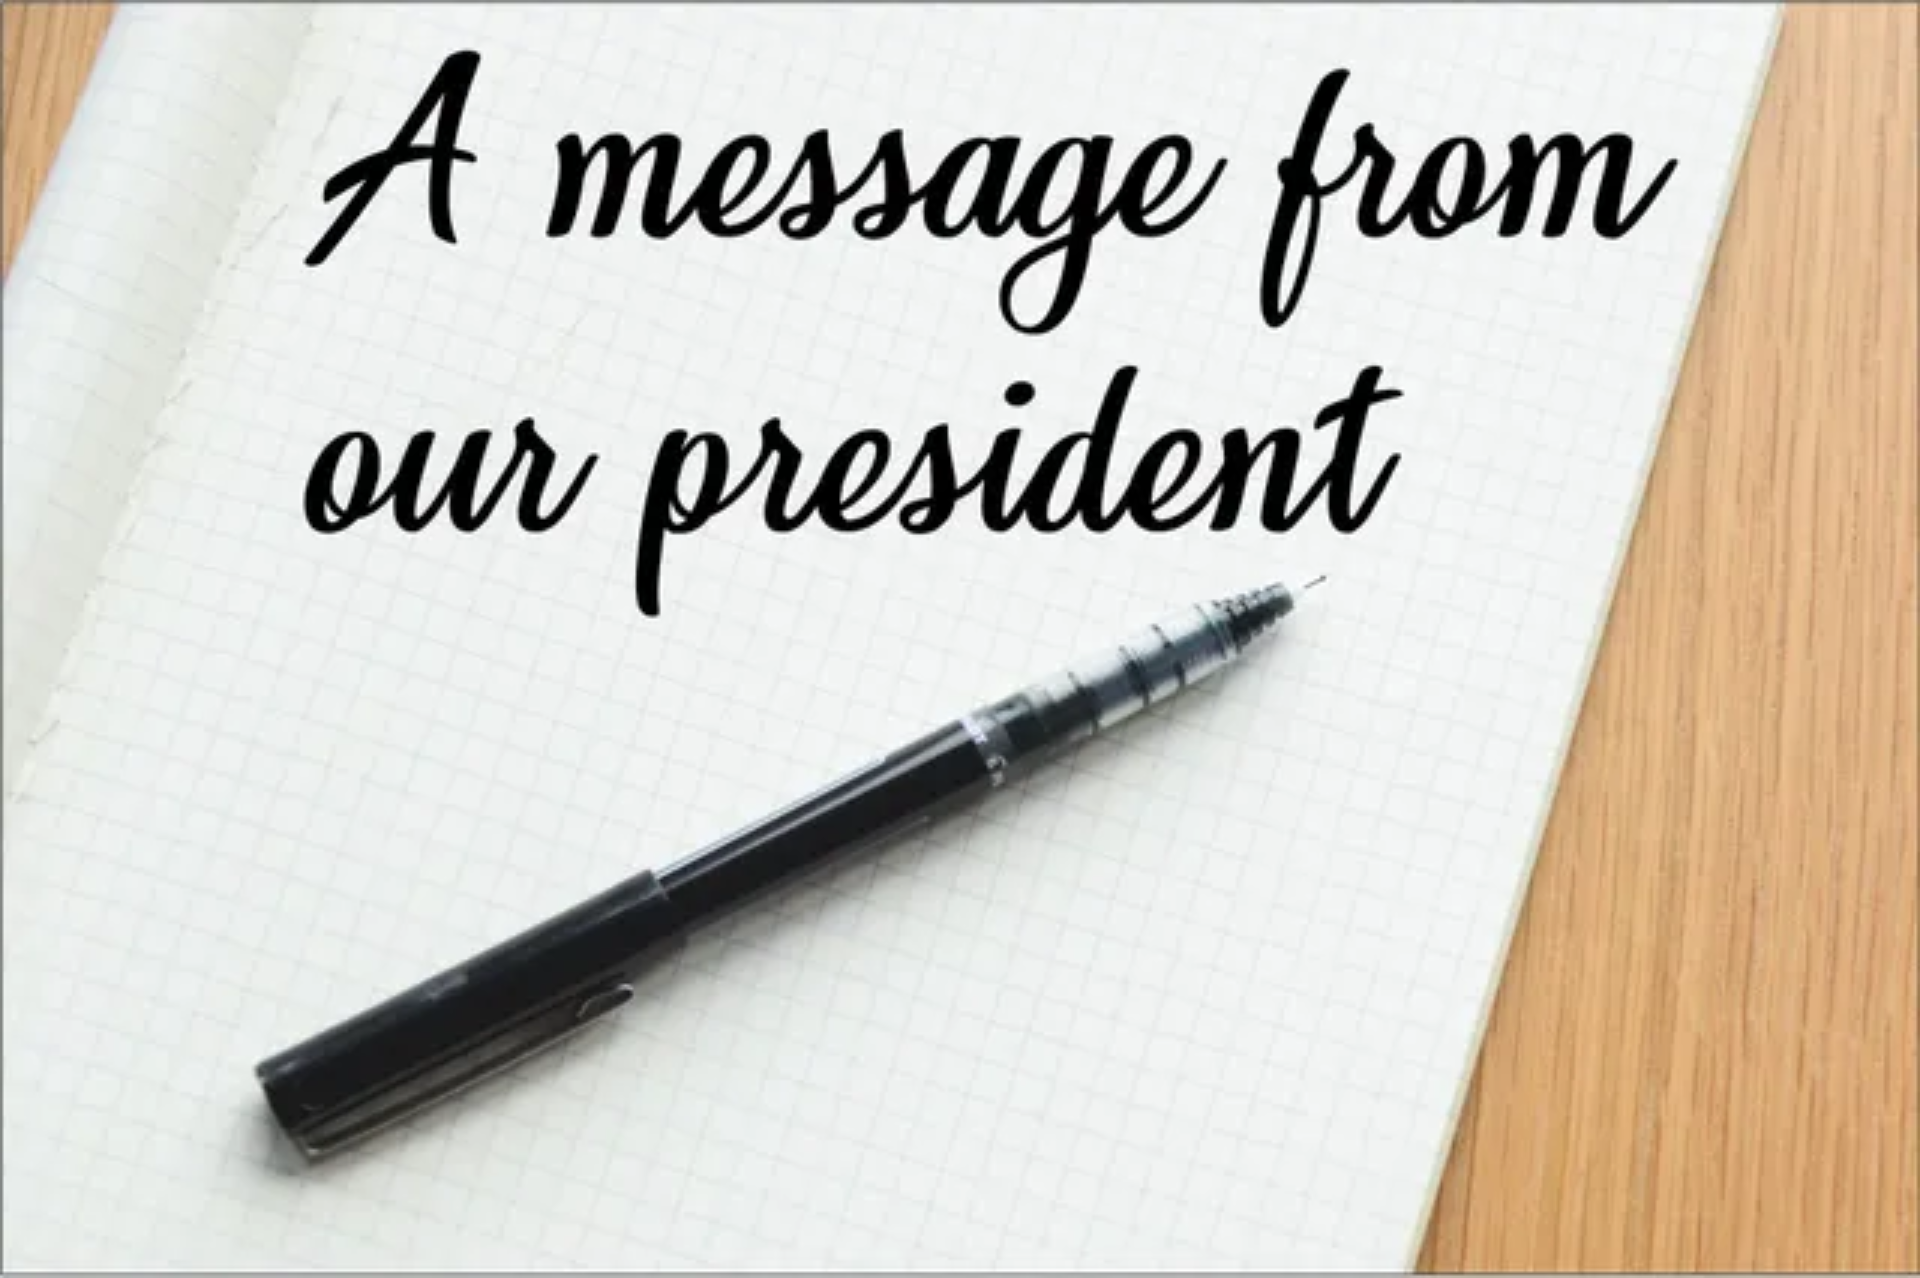 A message from our president with a picture of a piece of paper and pencil